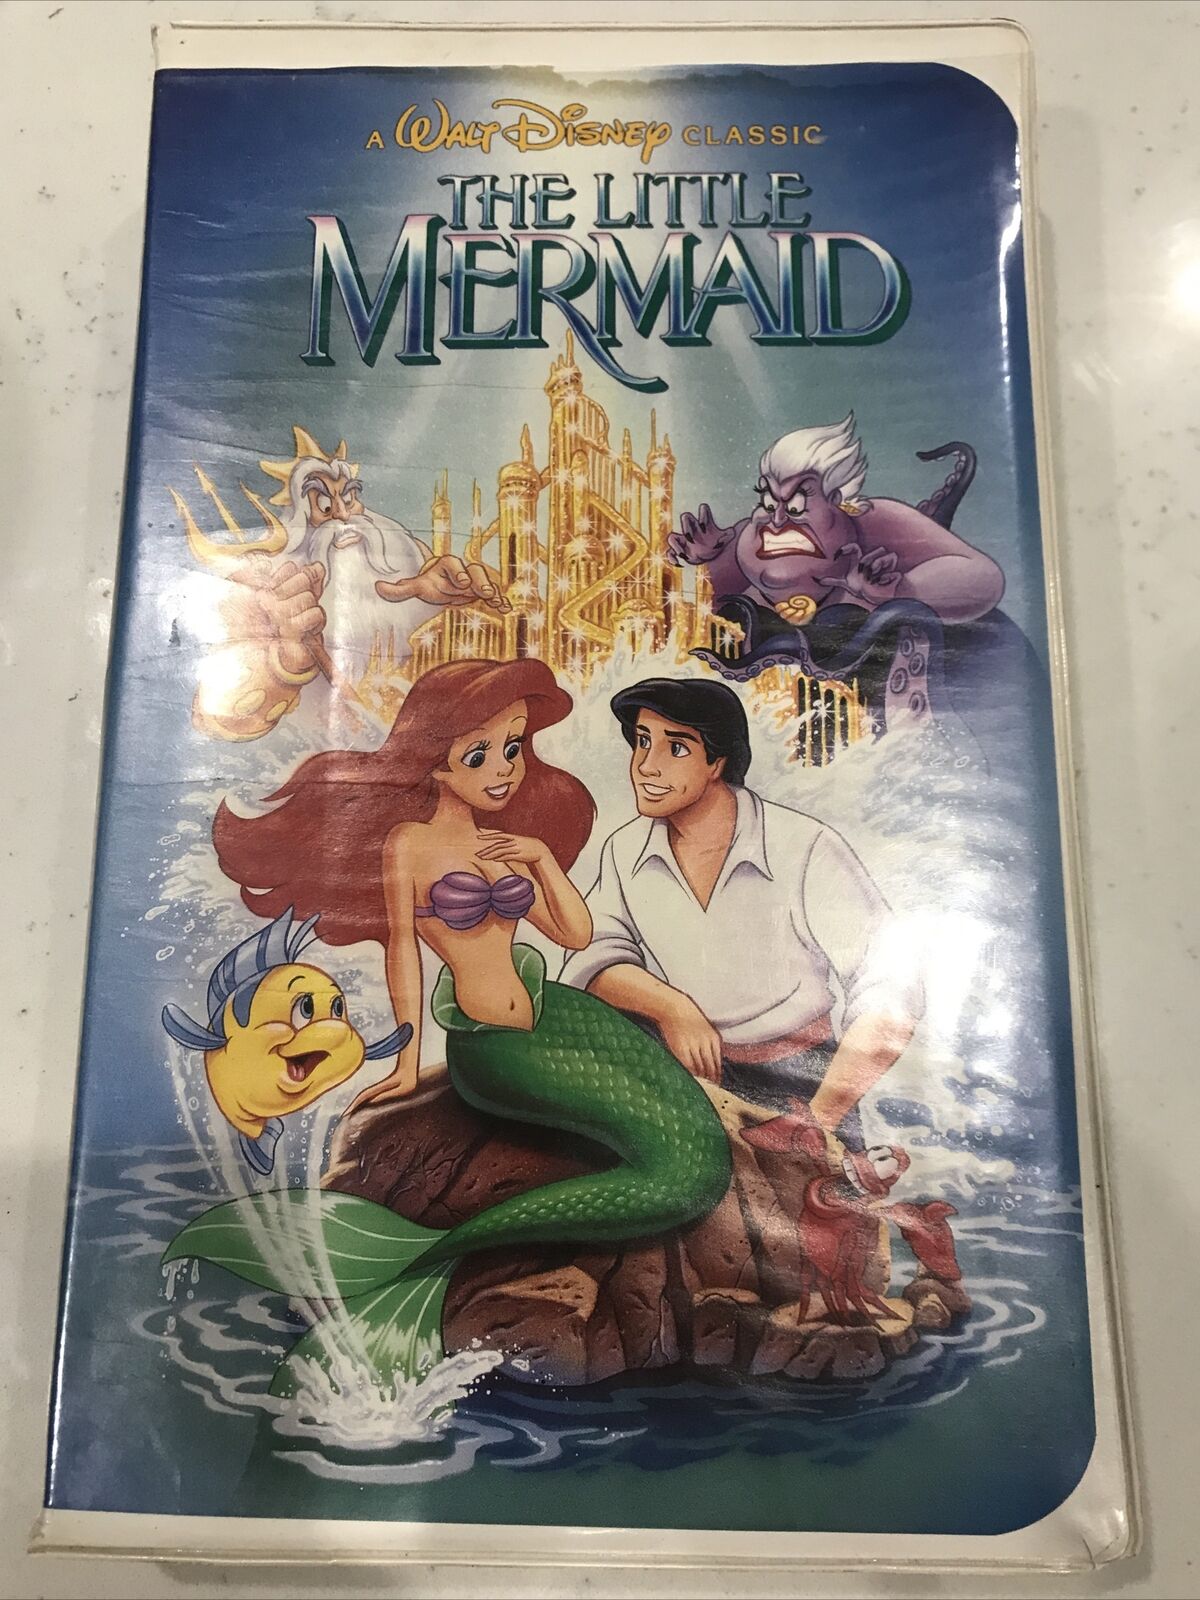 Vintage THE LITTLE MERMAID Banned Cover 1989 VHS Disney Classic